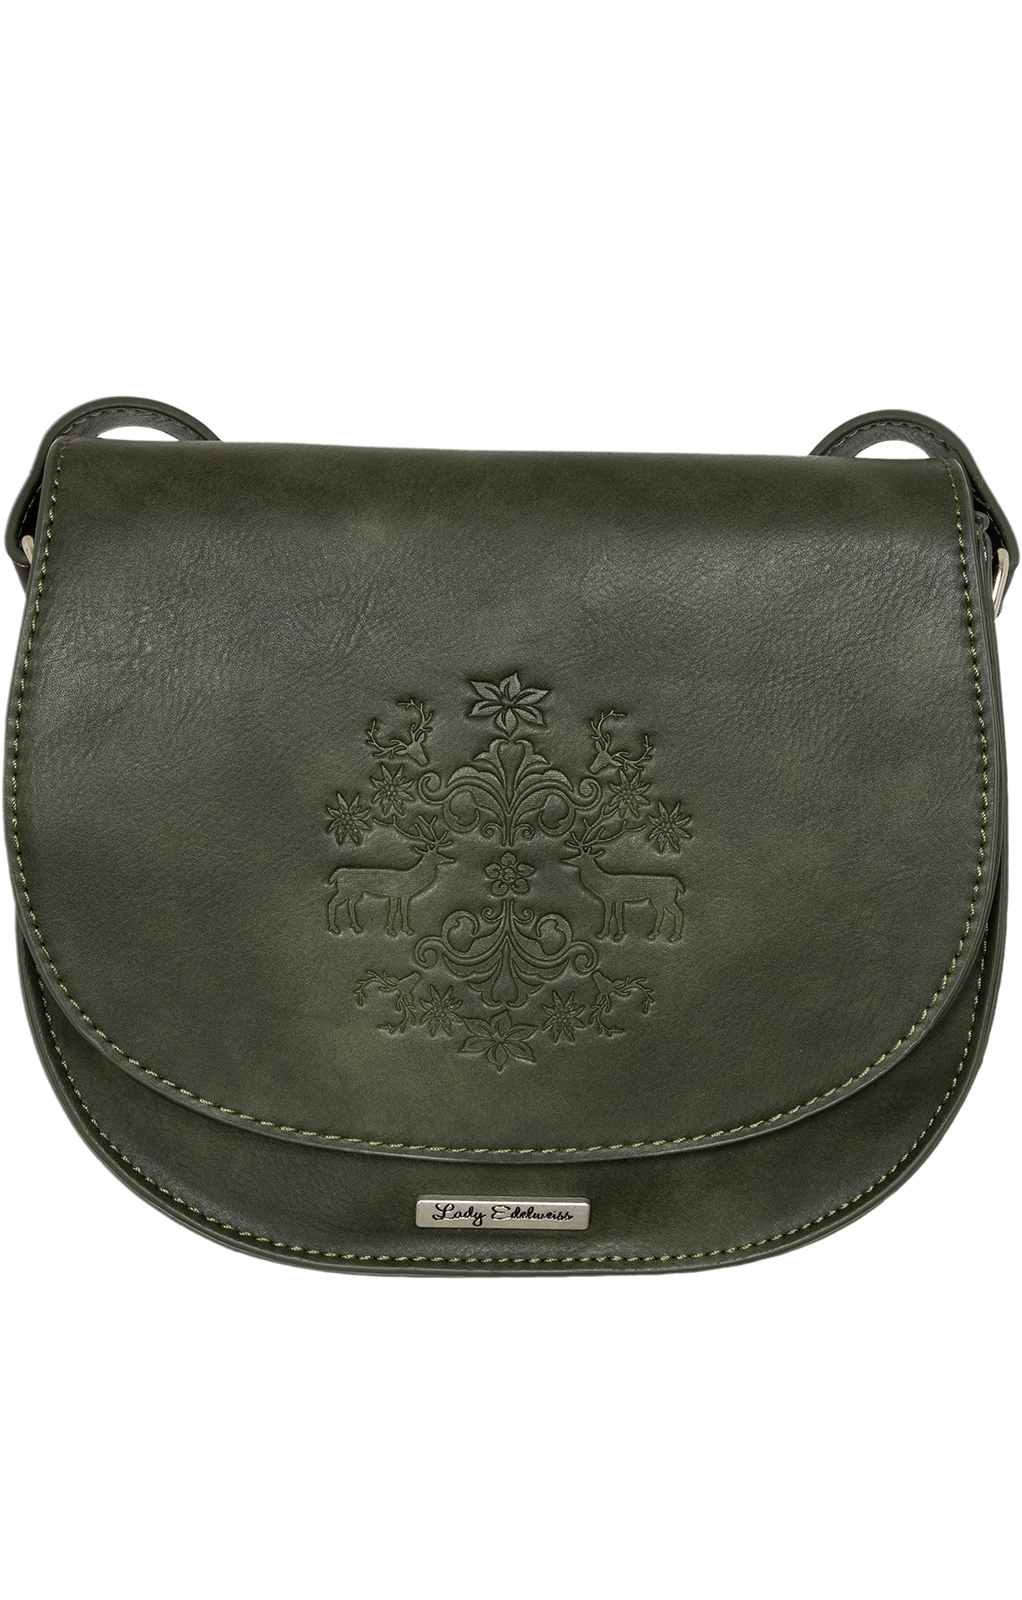 Traditional bag 13102 antique green von Lady Edelweiss